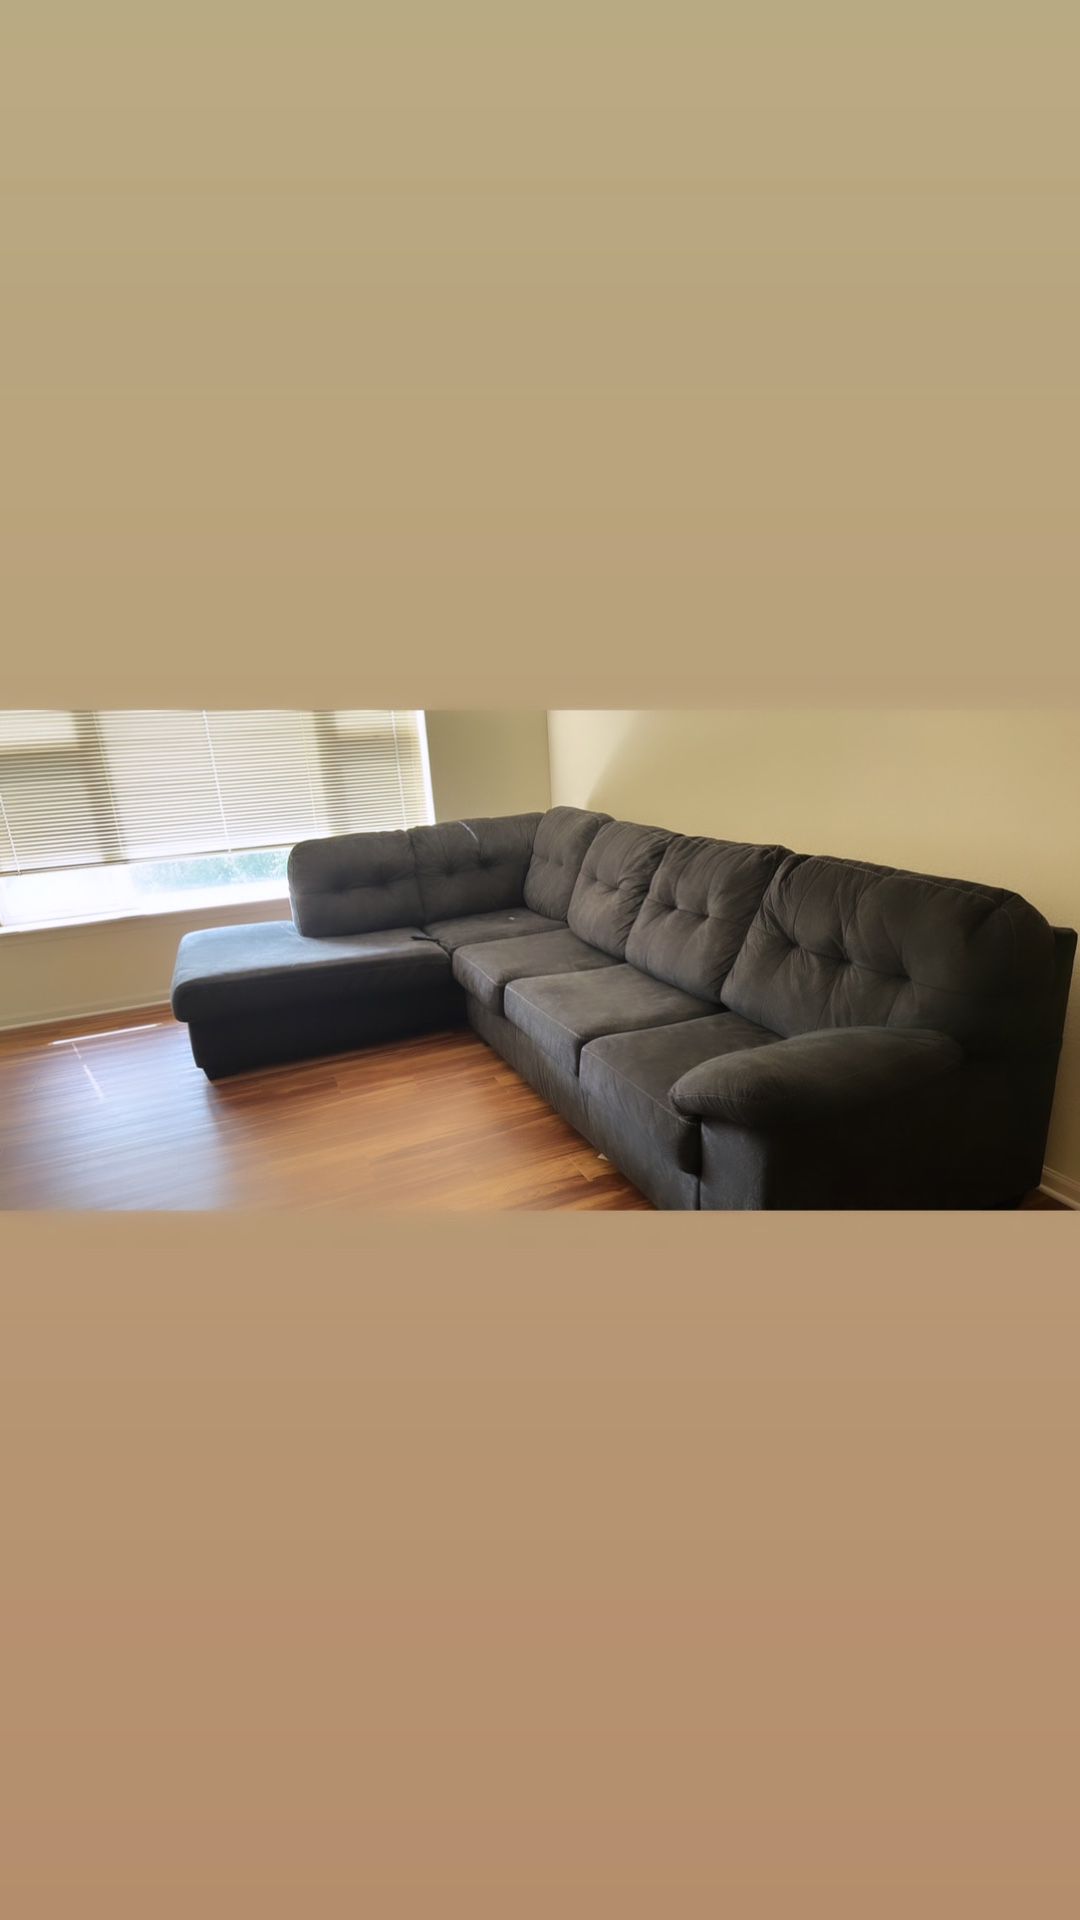 Loveseat Couch